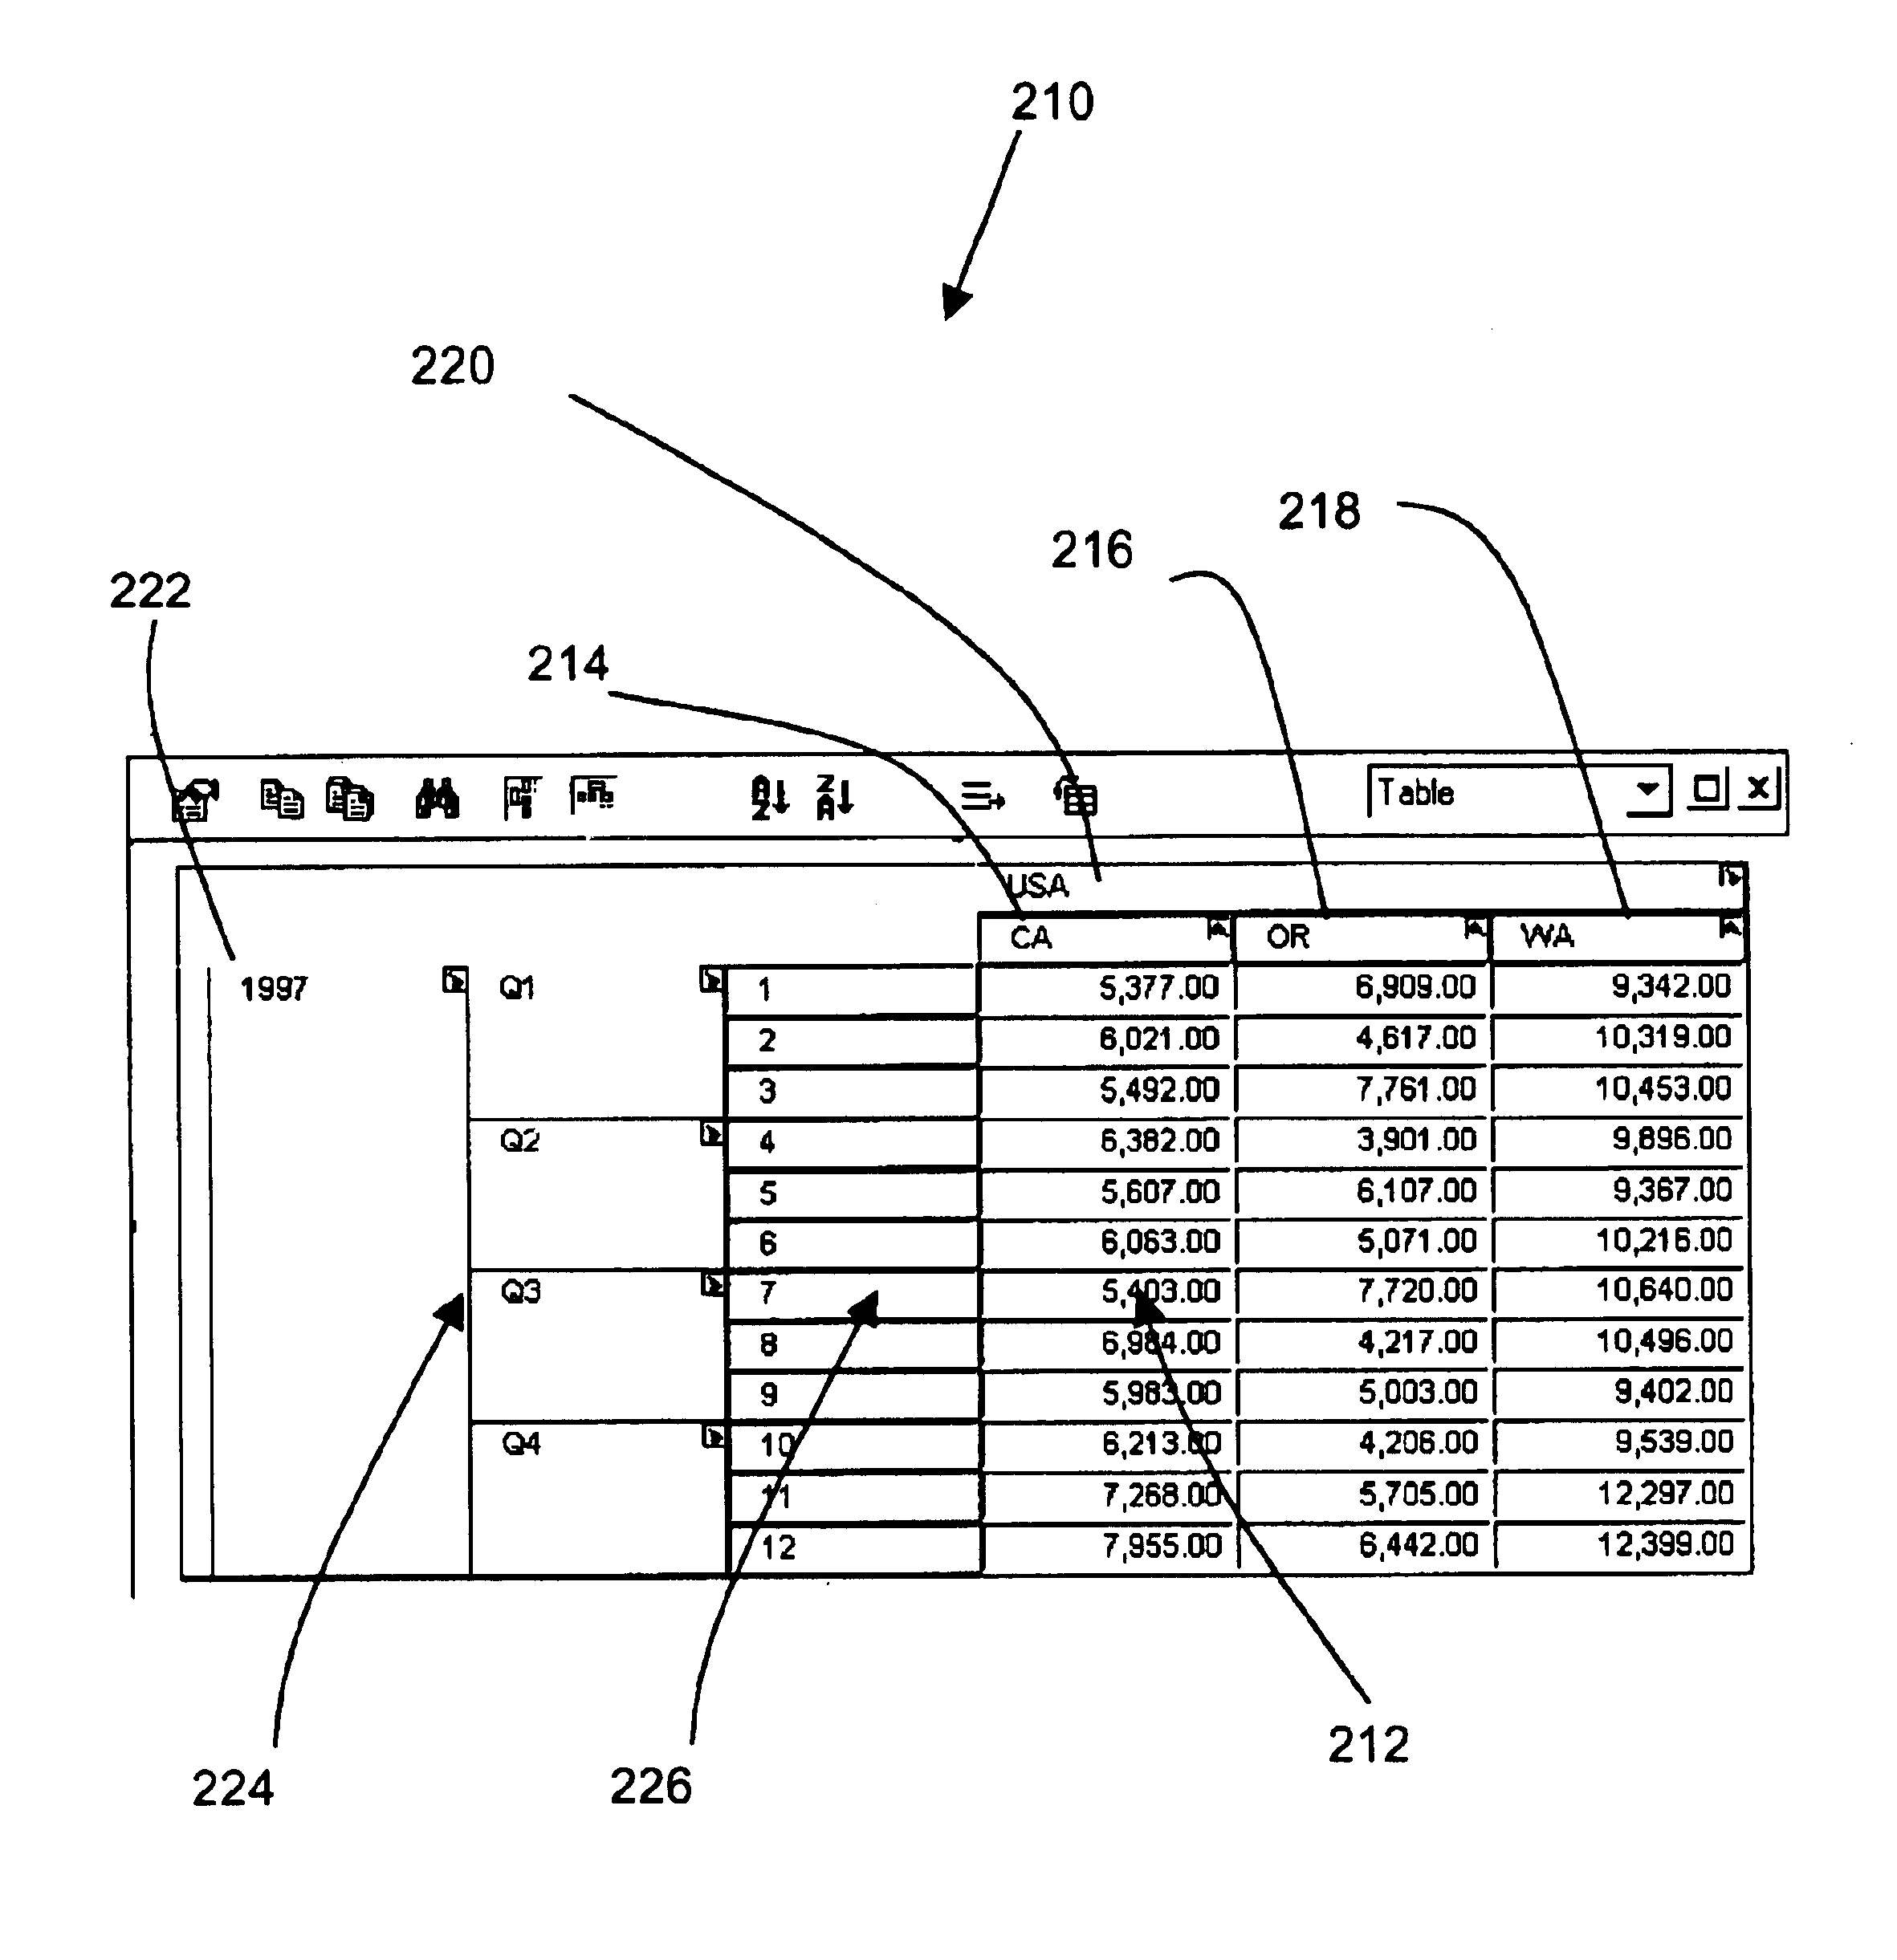 Programs and methods for the display, analysis and manipulation of multi-dimensional data implemented on a computer